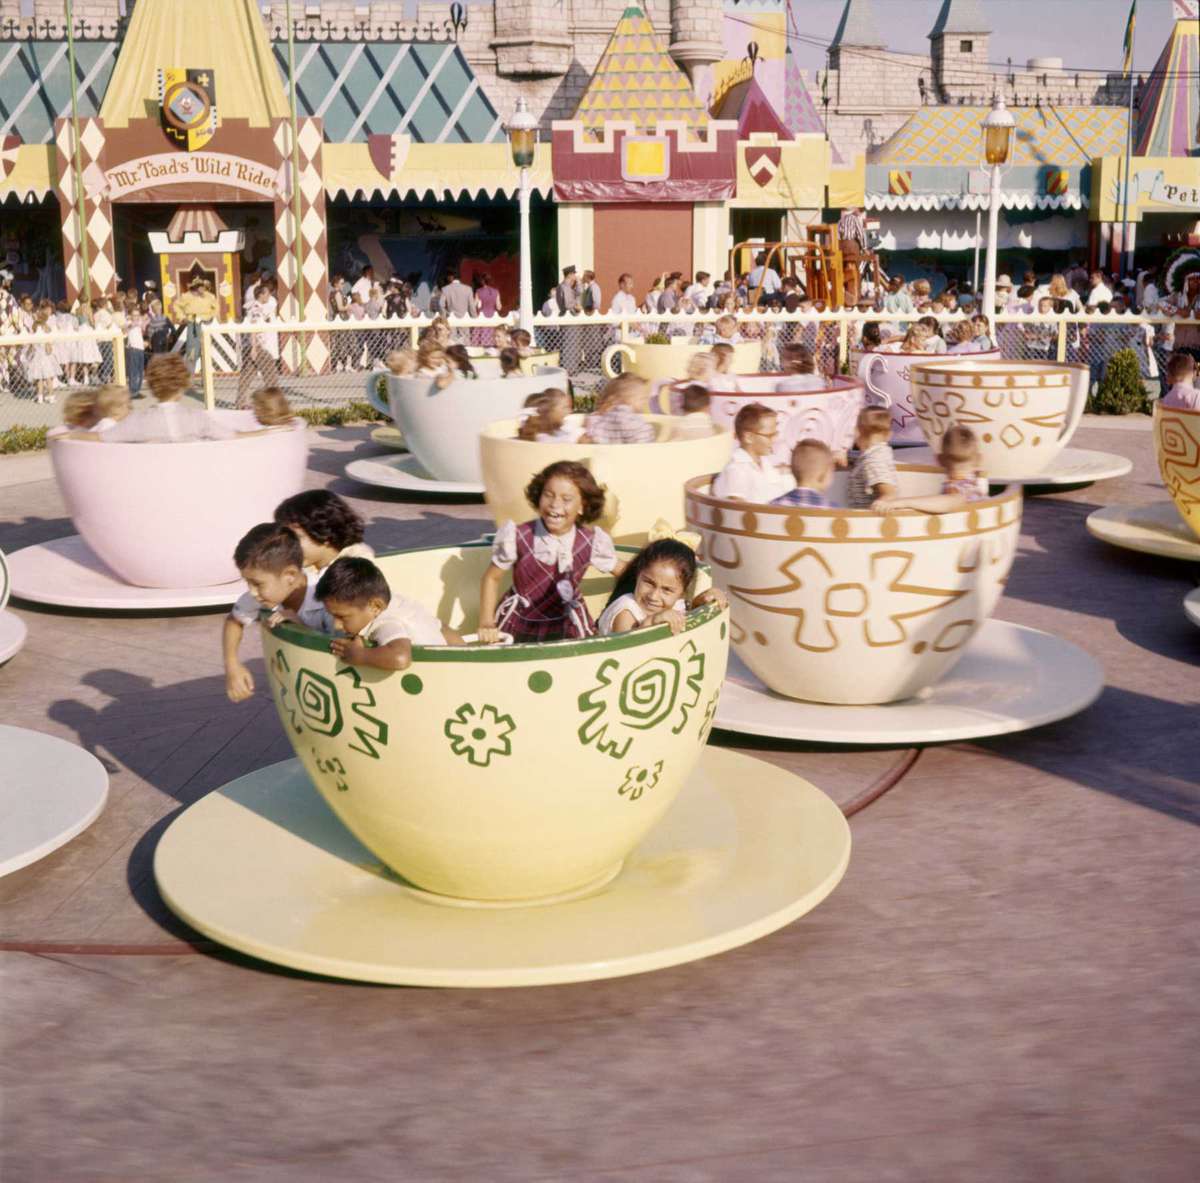 Cups and saucers filled with children at the 'Mad Hatter's Tea Party' attraction in Fantasyland, Disneyland Amusement Park, Anaheim, California.